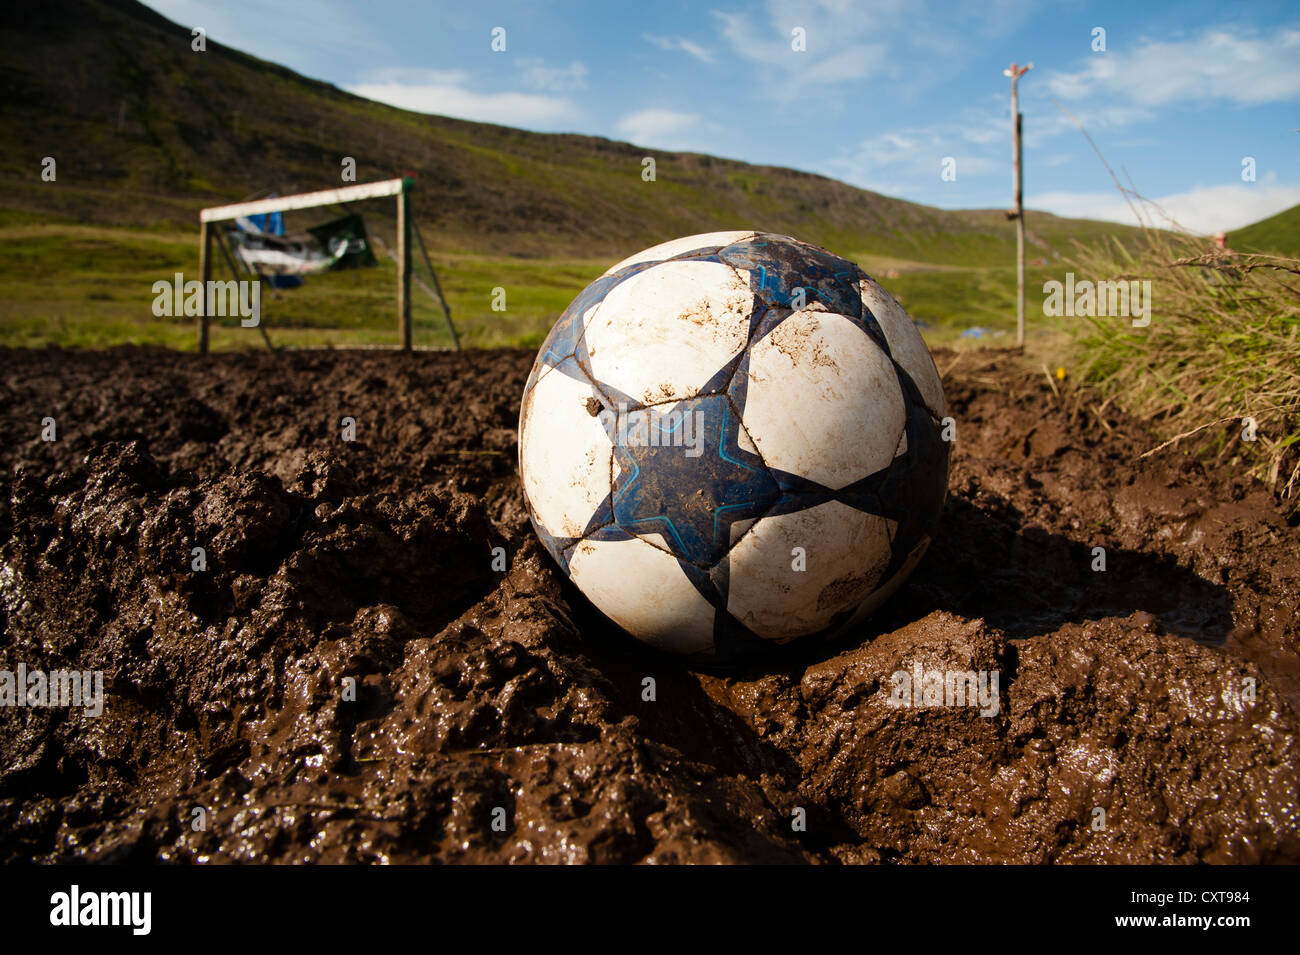 A soccer ball and a goal, European championships of mud-soccer, town of Isafjordur, West Fjords, Iceland, Europe Stock Photo